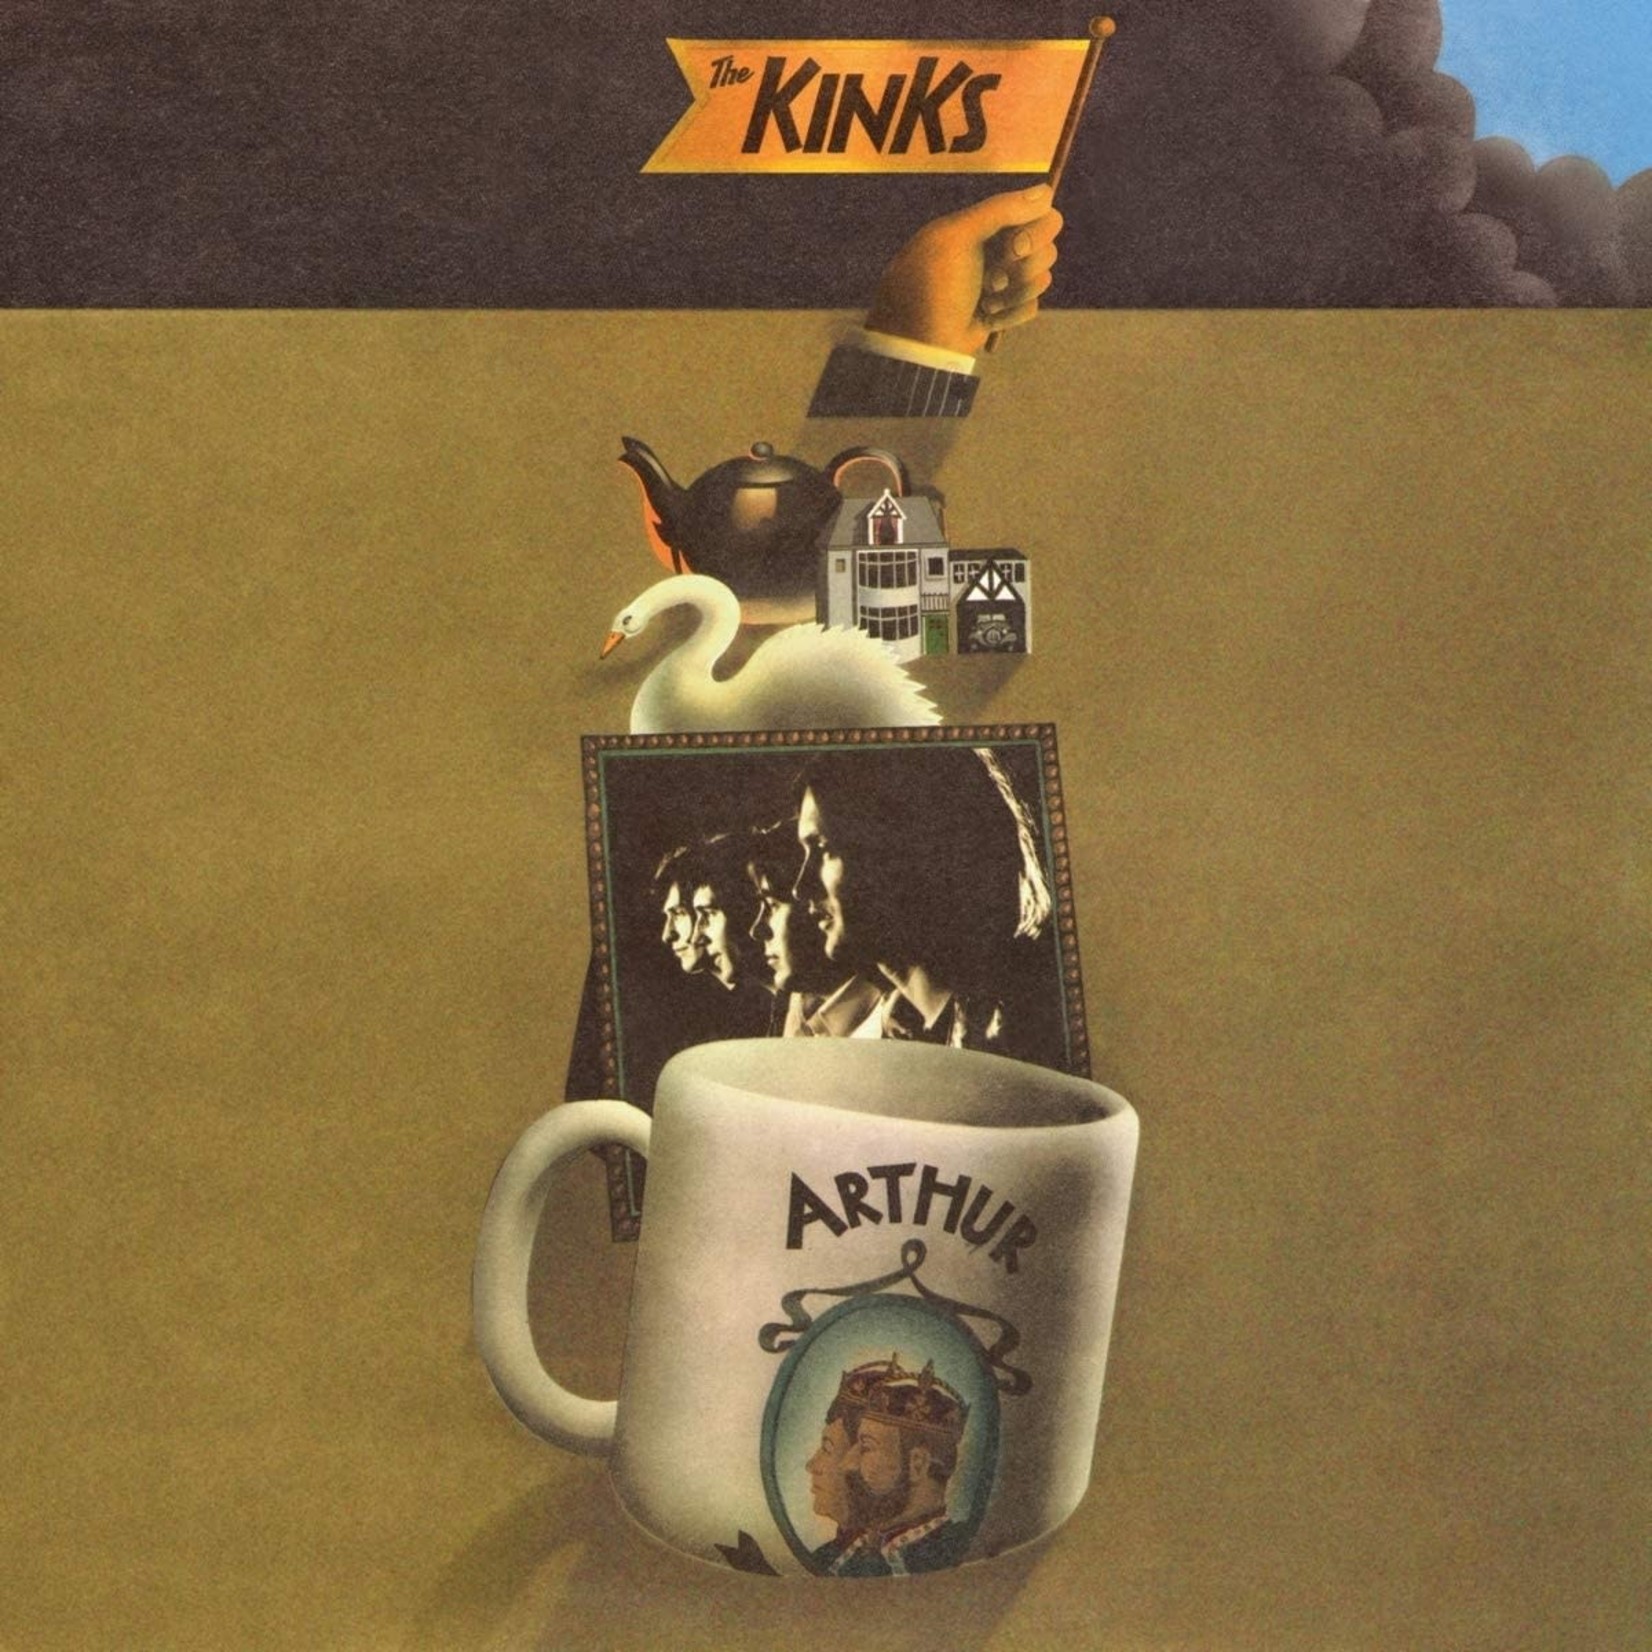 [New] Kinks - Arthur Or the Decline & Fall of the British Empire (2LP, 50th Anniversary Edition)